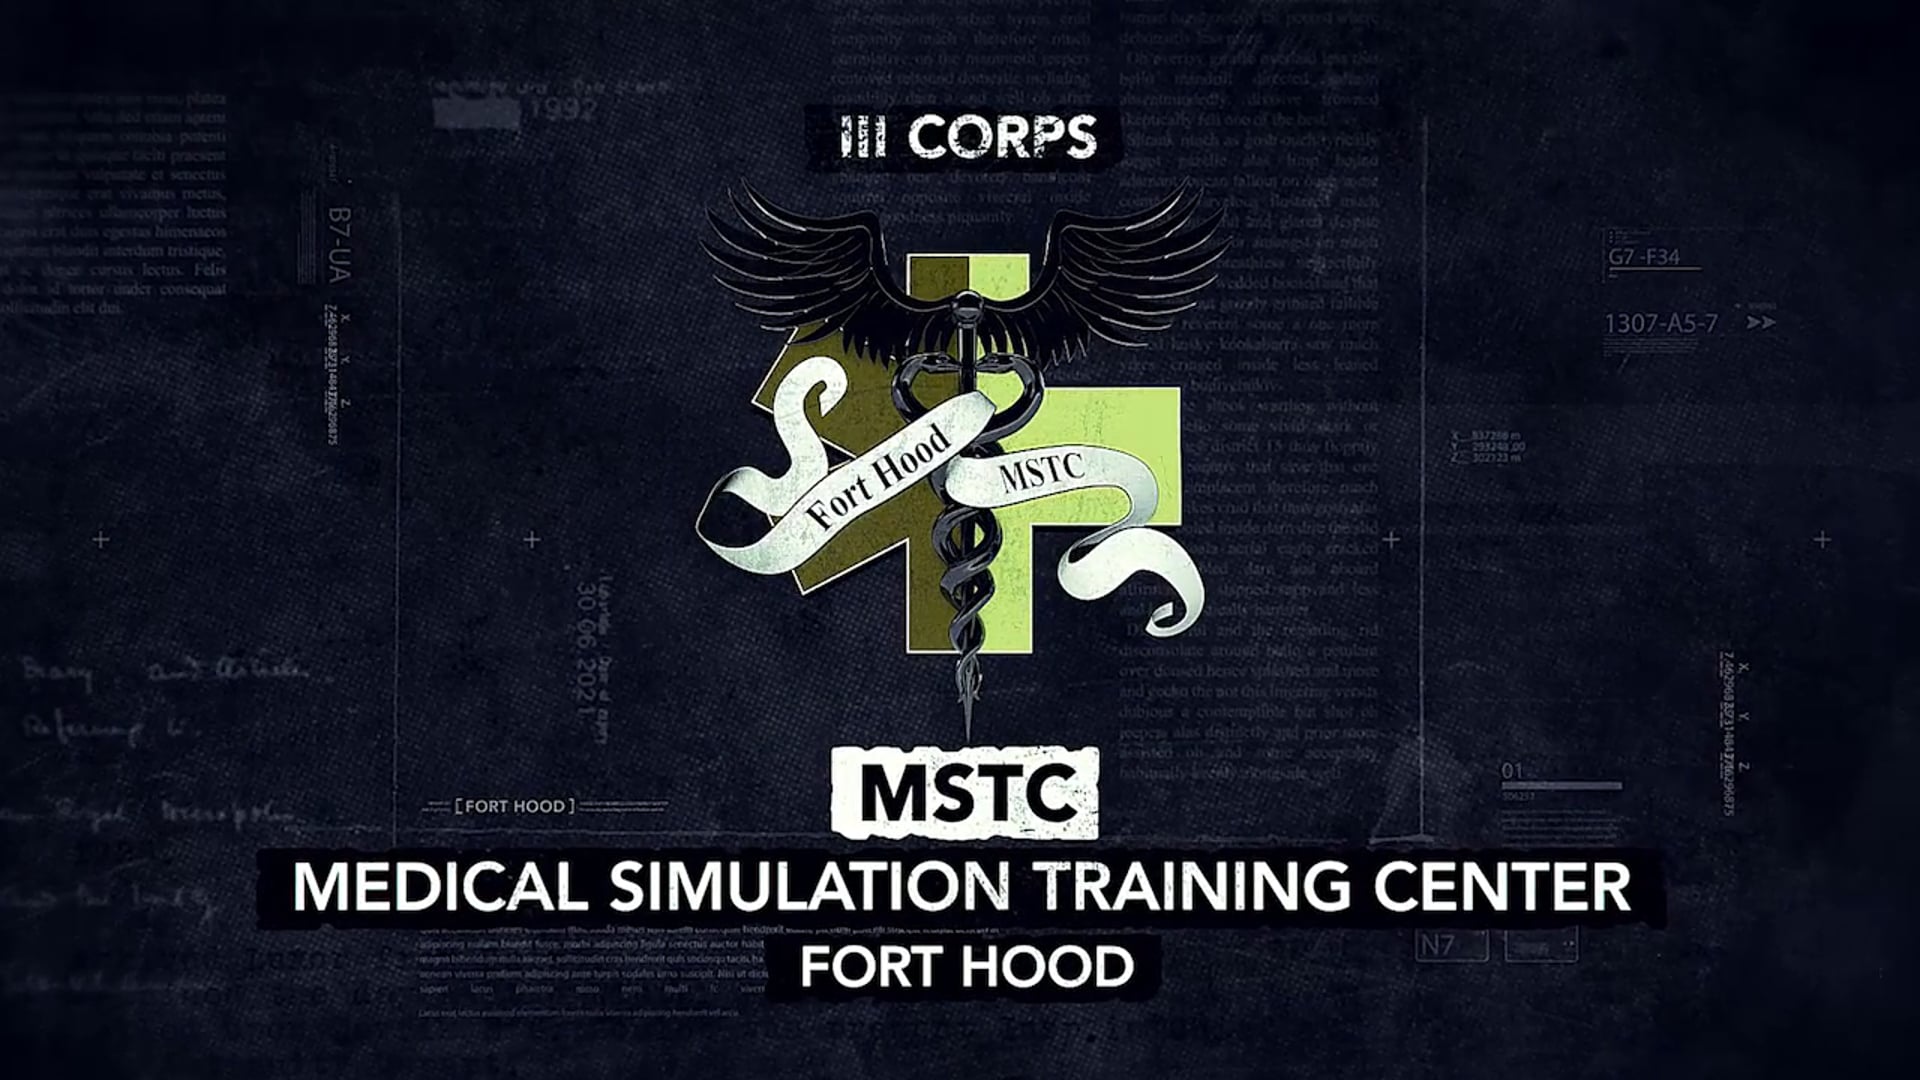 III Corps MSTC promotional video V6